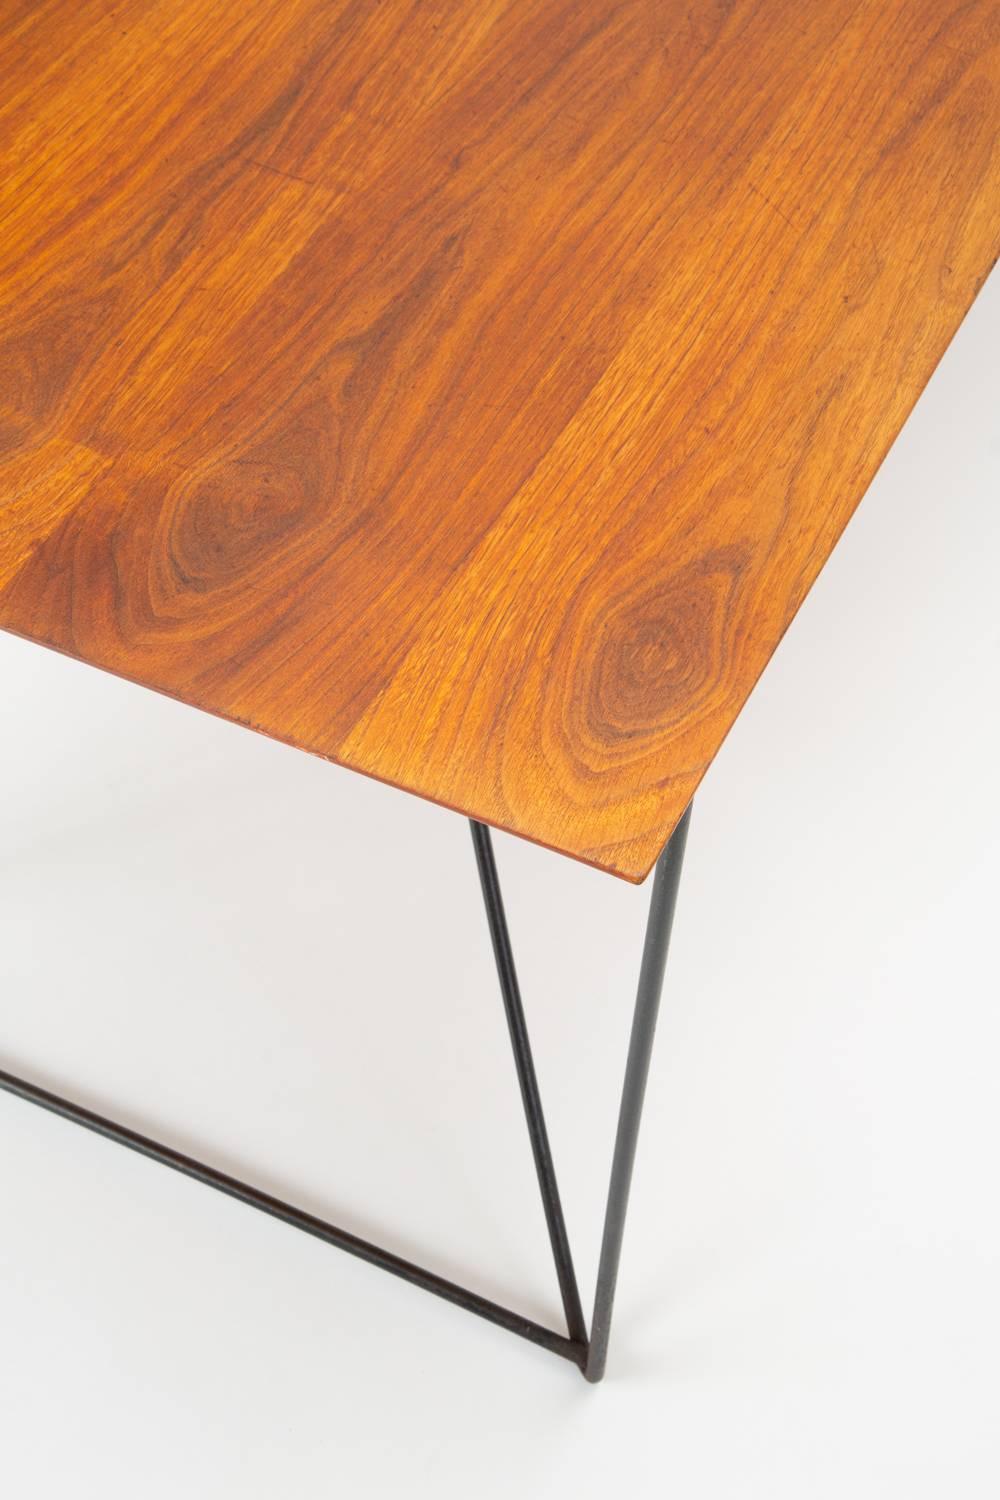 Luther Conover Table with Custom Painted Walnut Top 5